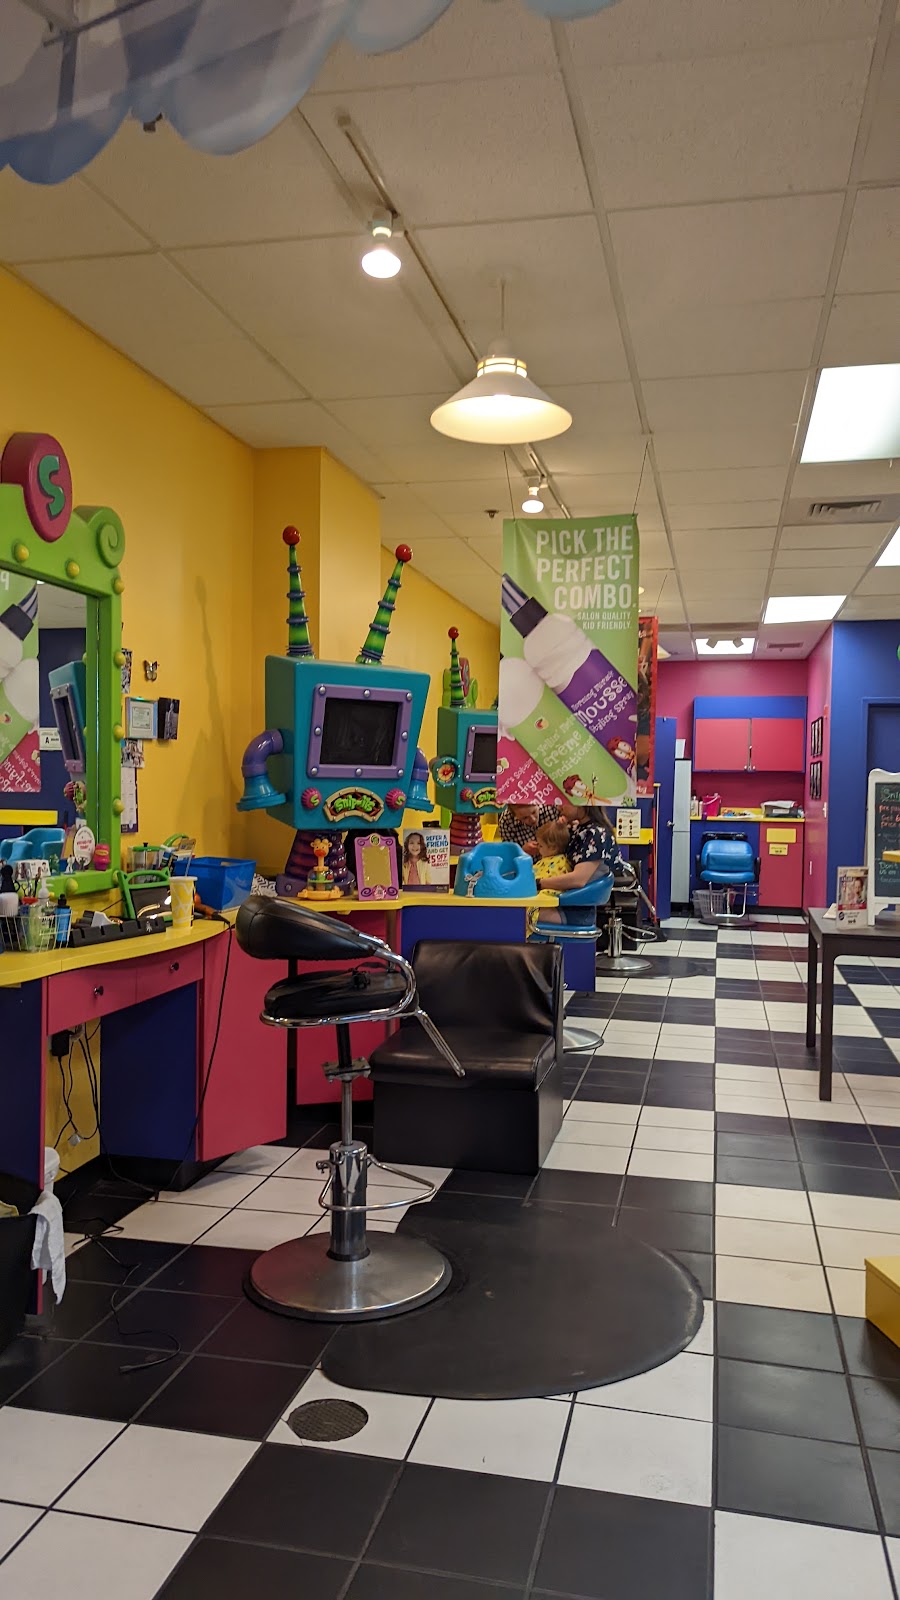 Snip-its Haircuts for Kids | 8625 Lindholm Dr, Huntersville, NC 28078 | Phone: (704) 987-0940